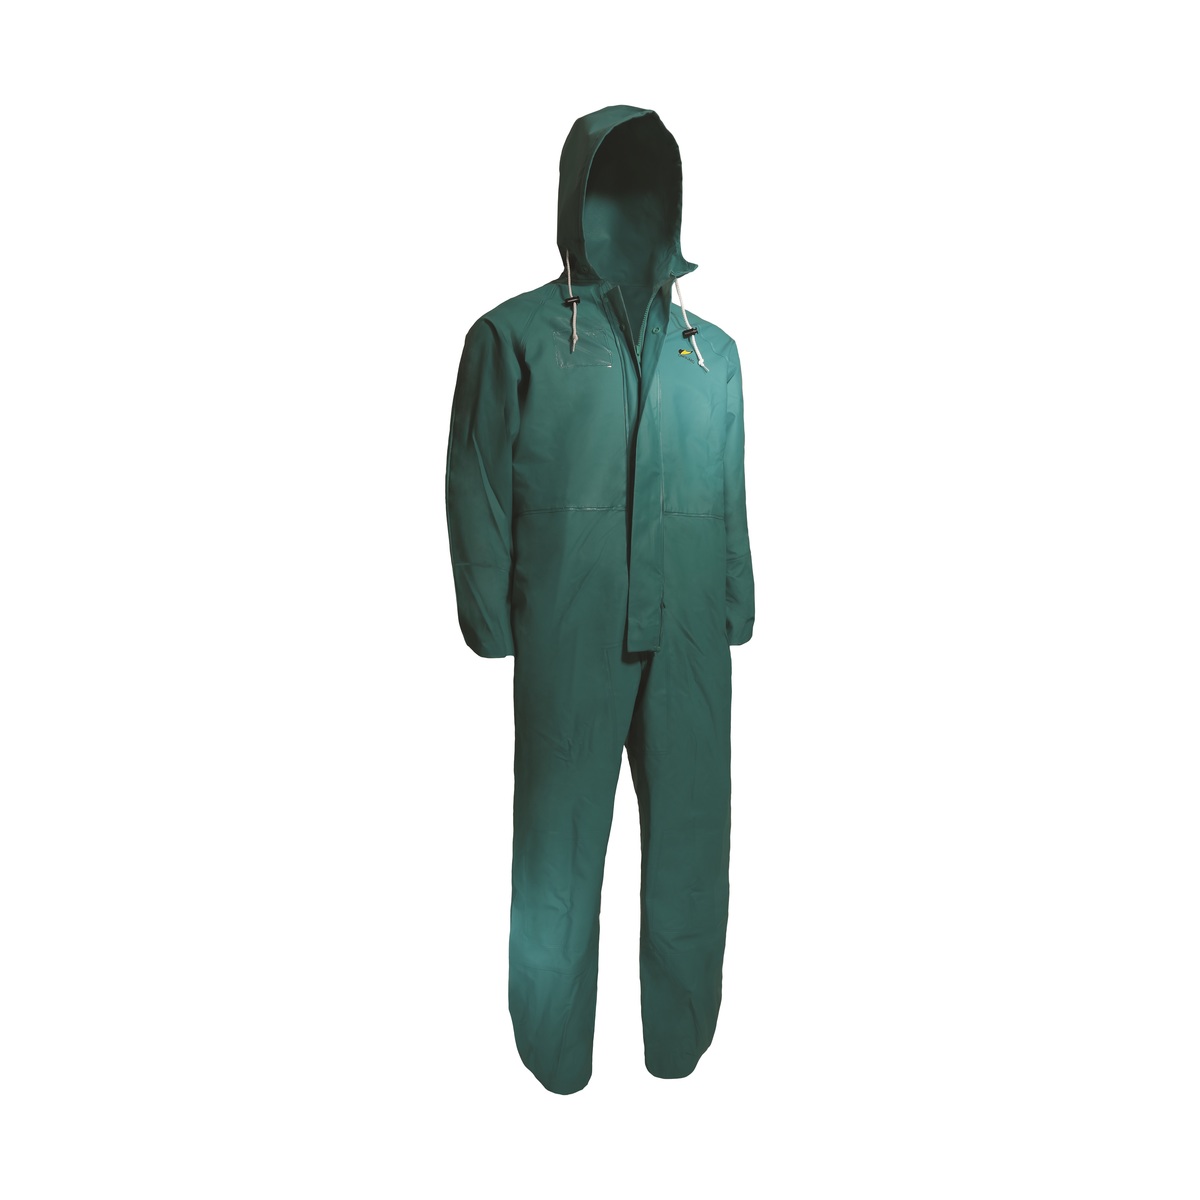 Dunlop® Protective Footwear Large Green Chemtex .42 mm Nylon/Polyester/PVC Coveralls With Attached Hood